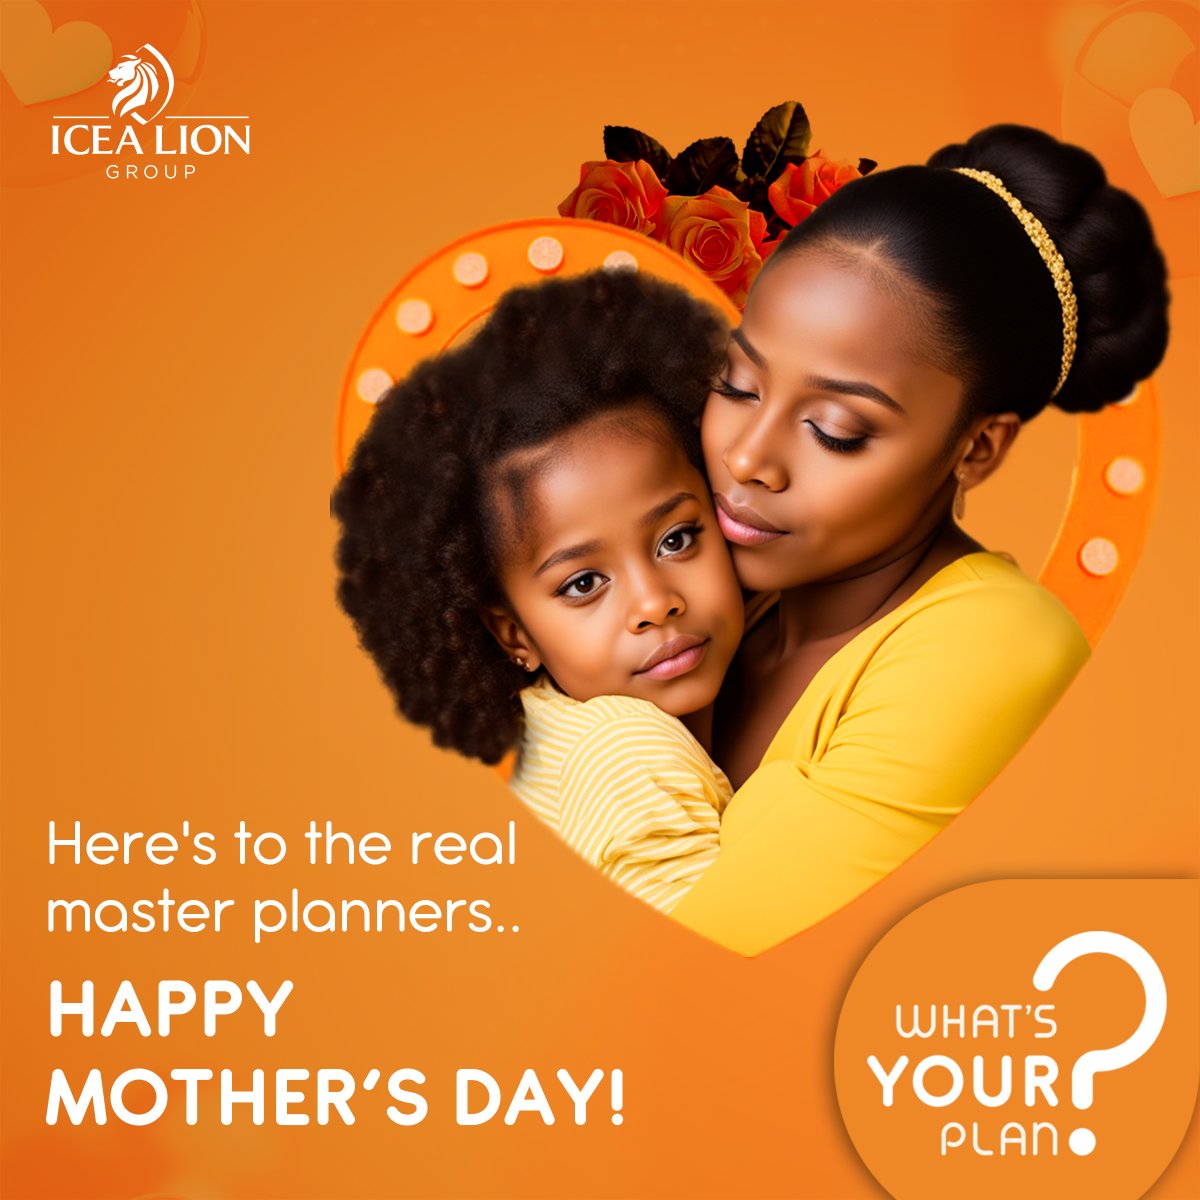 Being a mother is like being a strategic planner for a family, every decision counts. From meal plans to scheduling activities to budgeting, moms are the masterminds behind it all. Join us in celebrating them & their incredible planning prowess today! #MothersDay #WhatsYourPlan